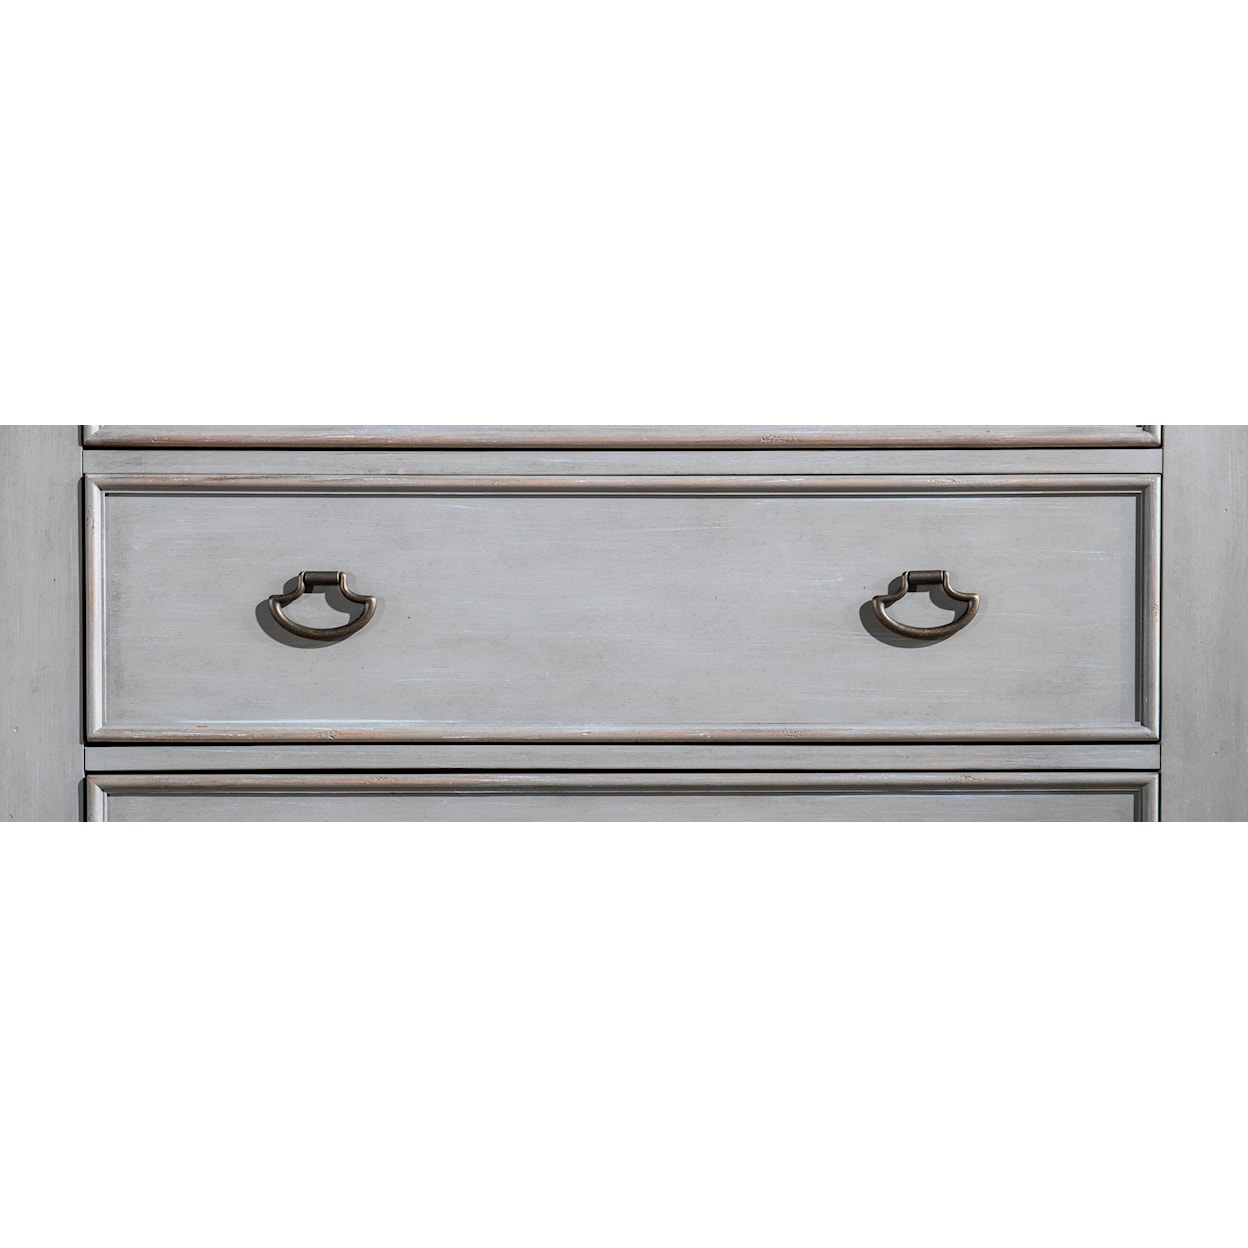 Legacy Classic Kingston Chest